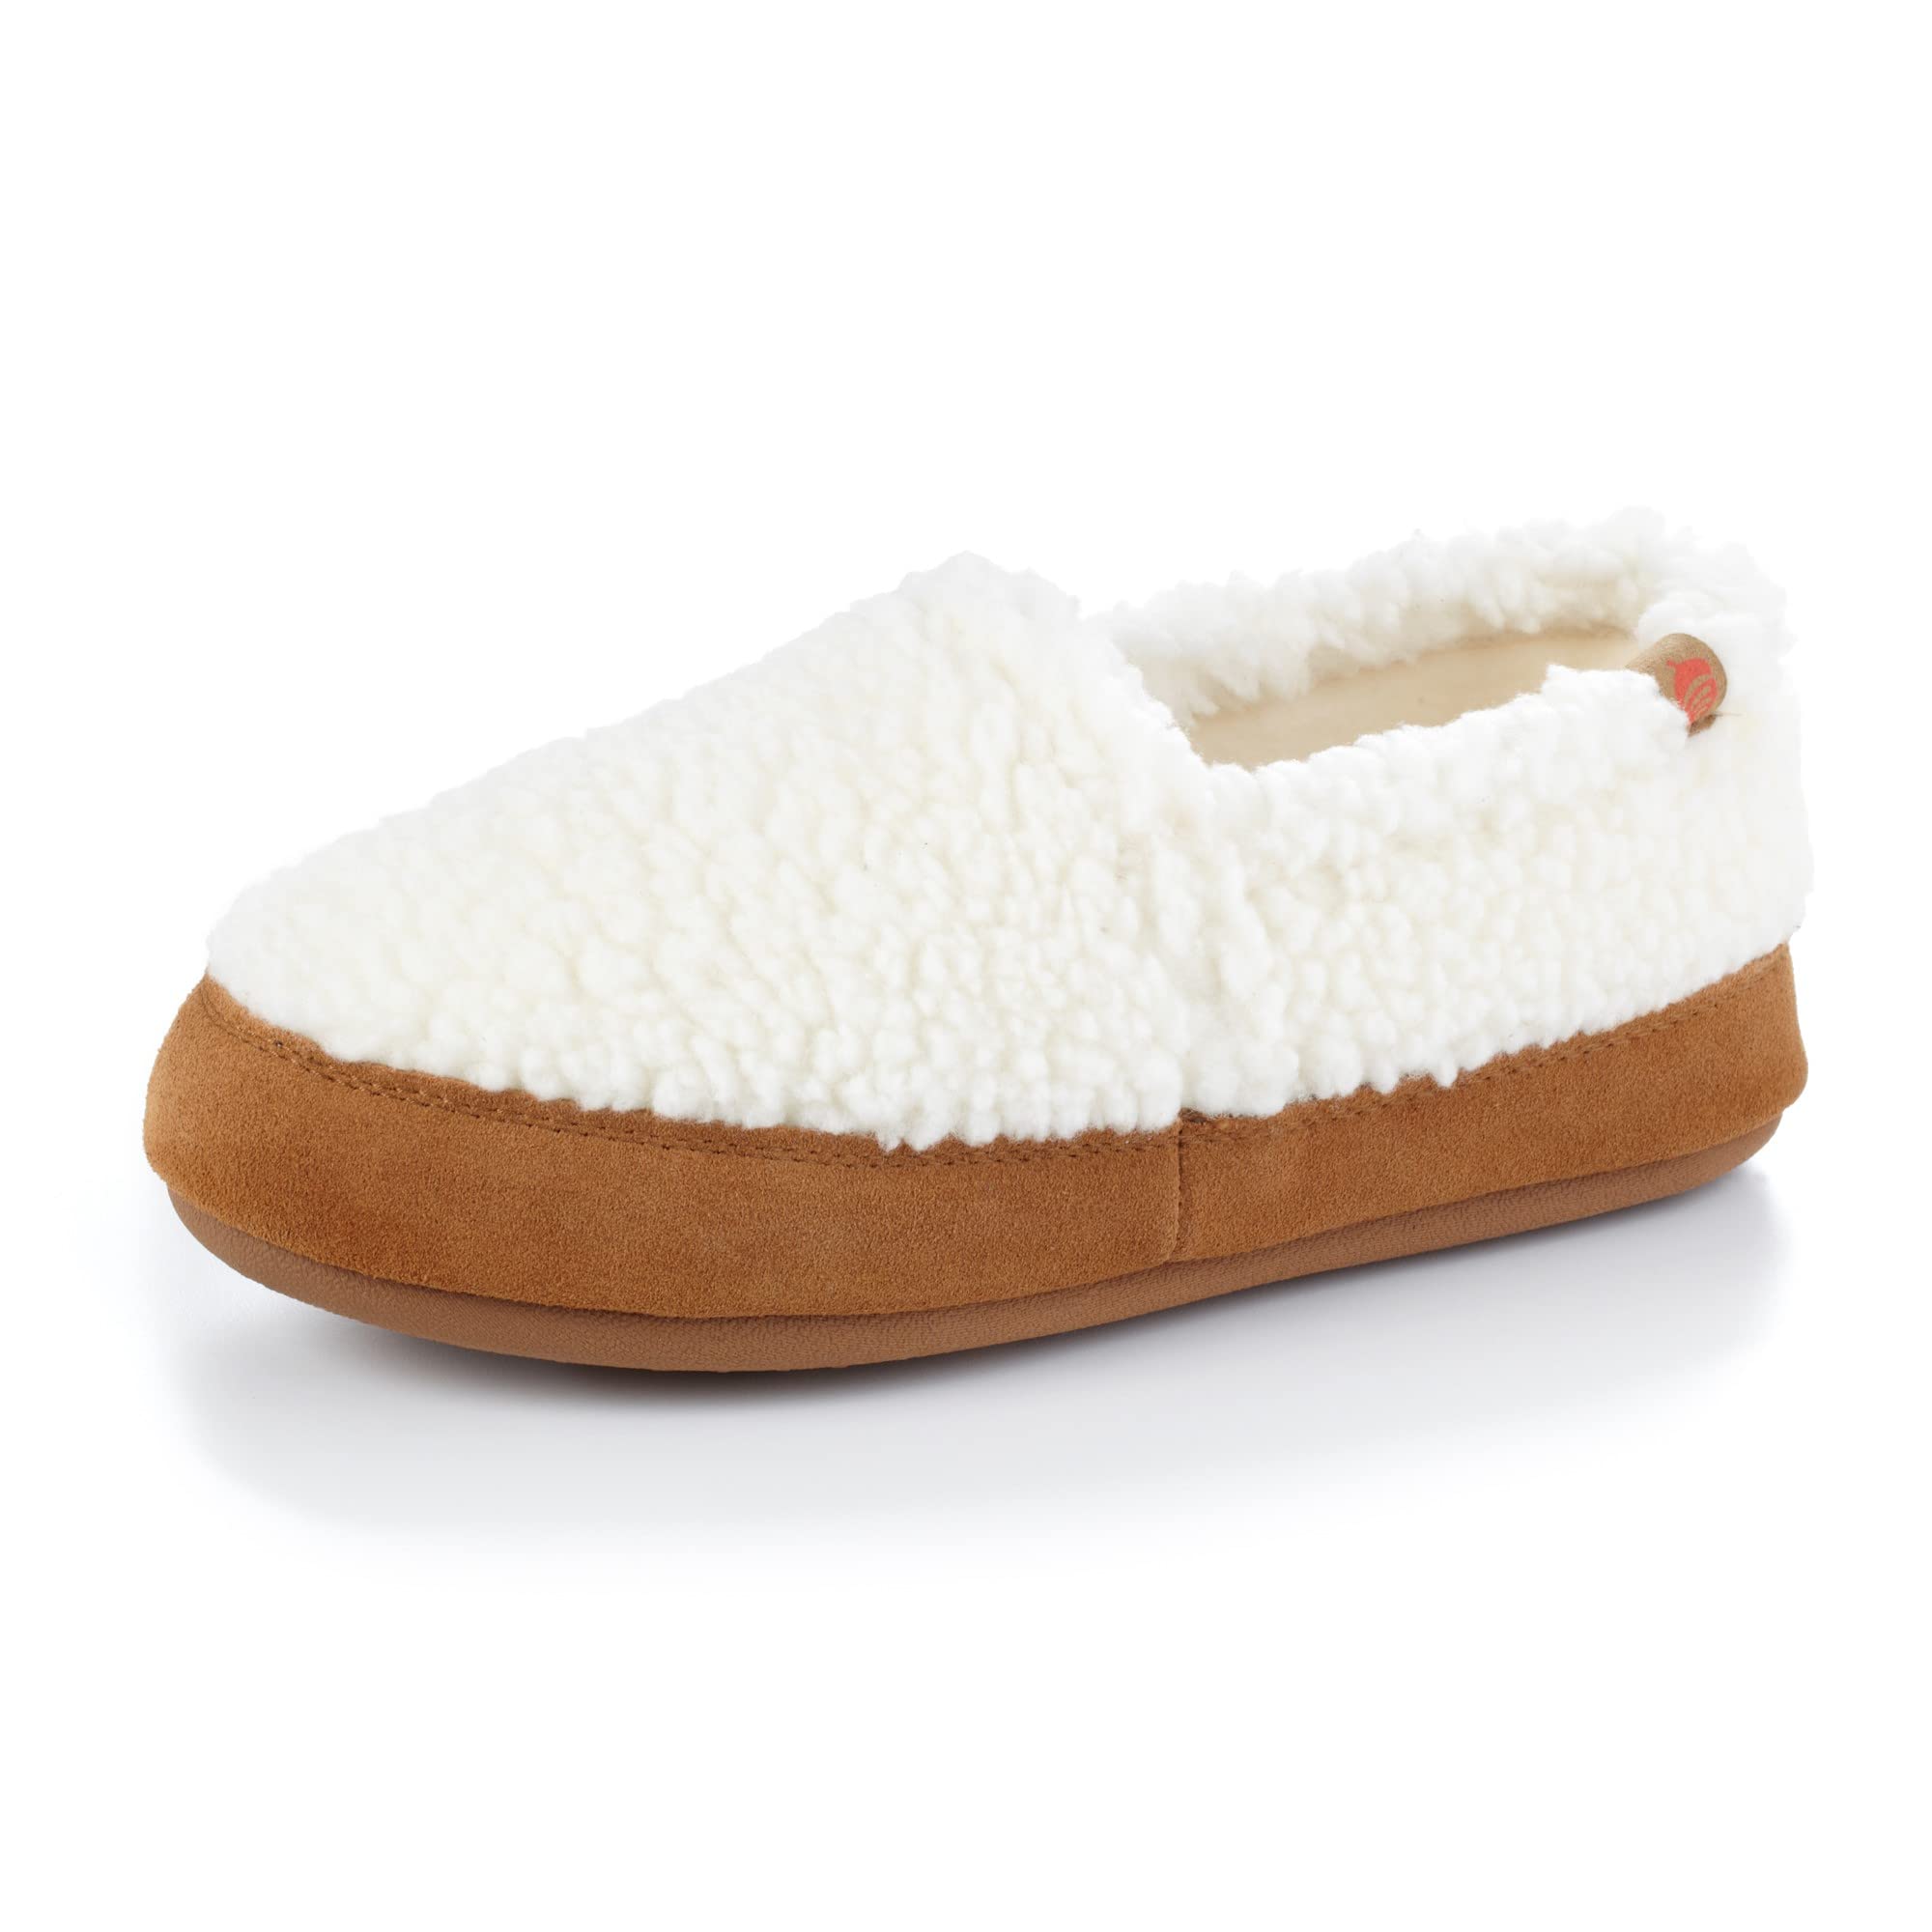 Acorn Women's Moc Slipper - Cozy Memory Foam Moccasins for Women, Cute House Shoes with Cloud Like Support and Indoor / Outdoor Sole